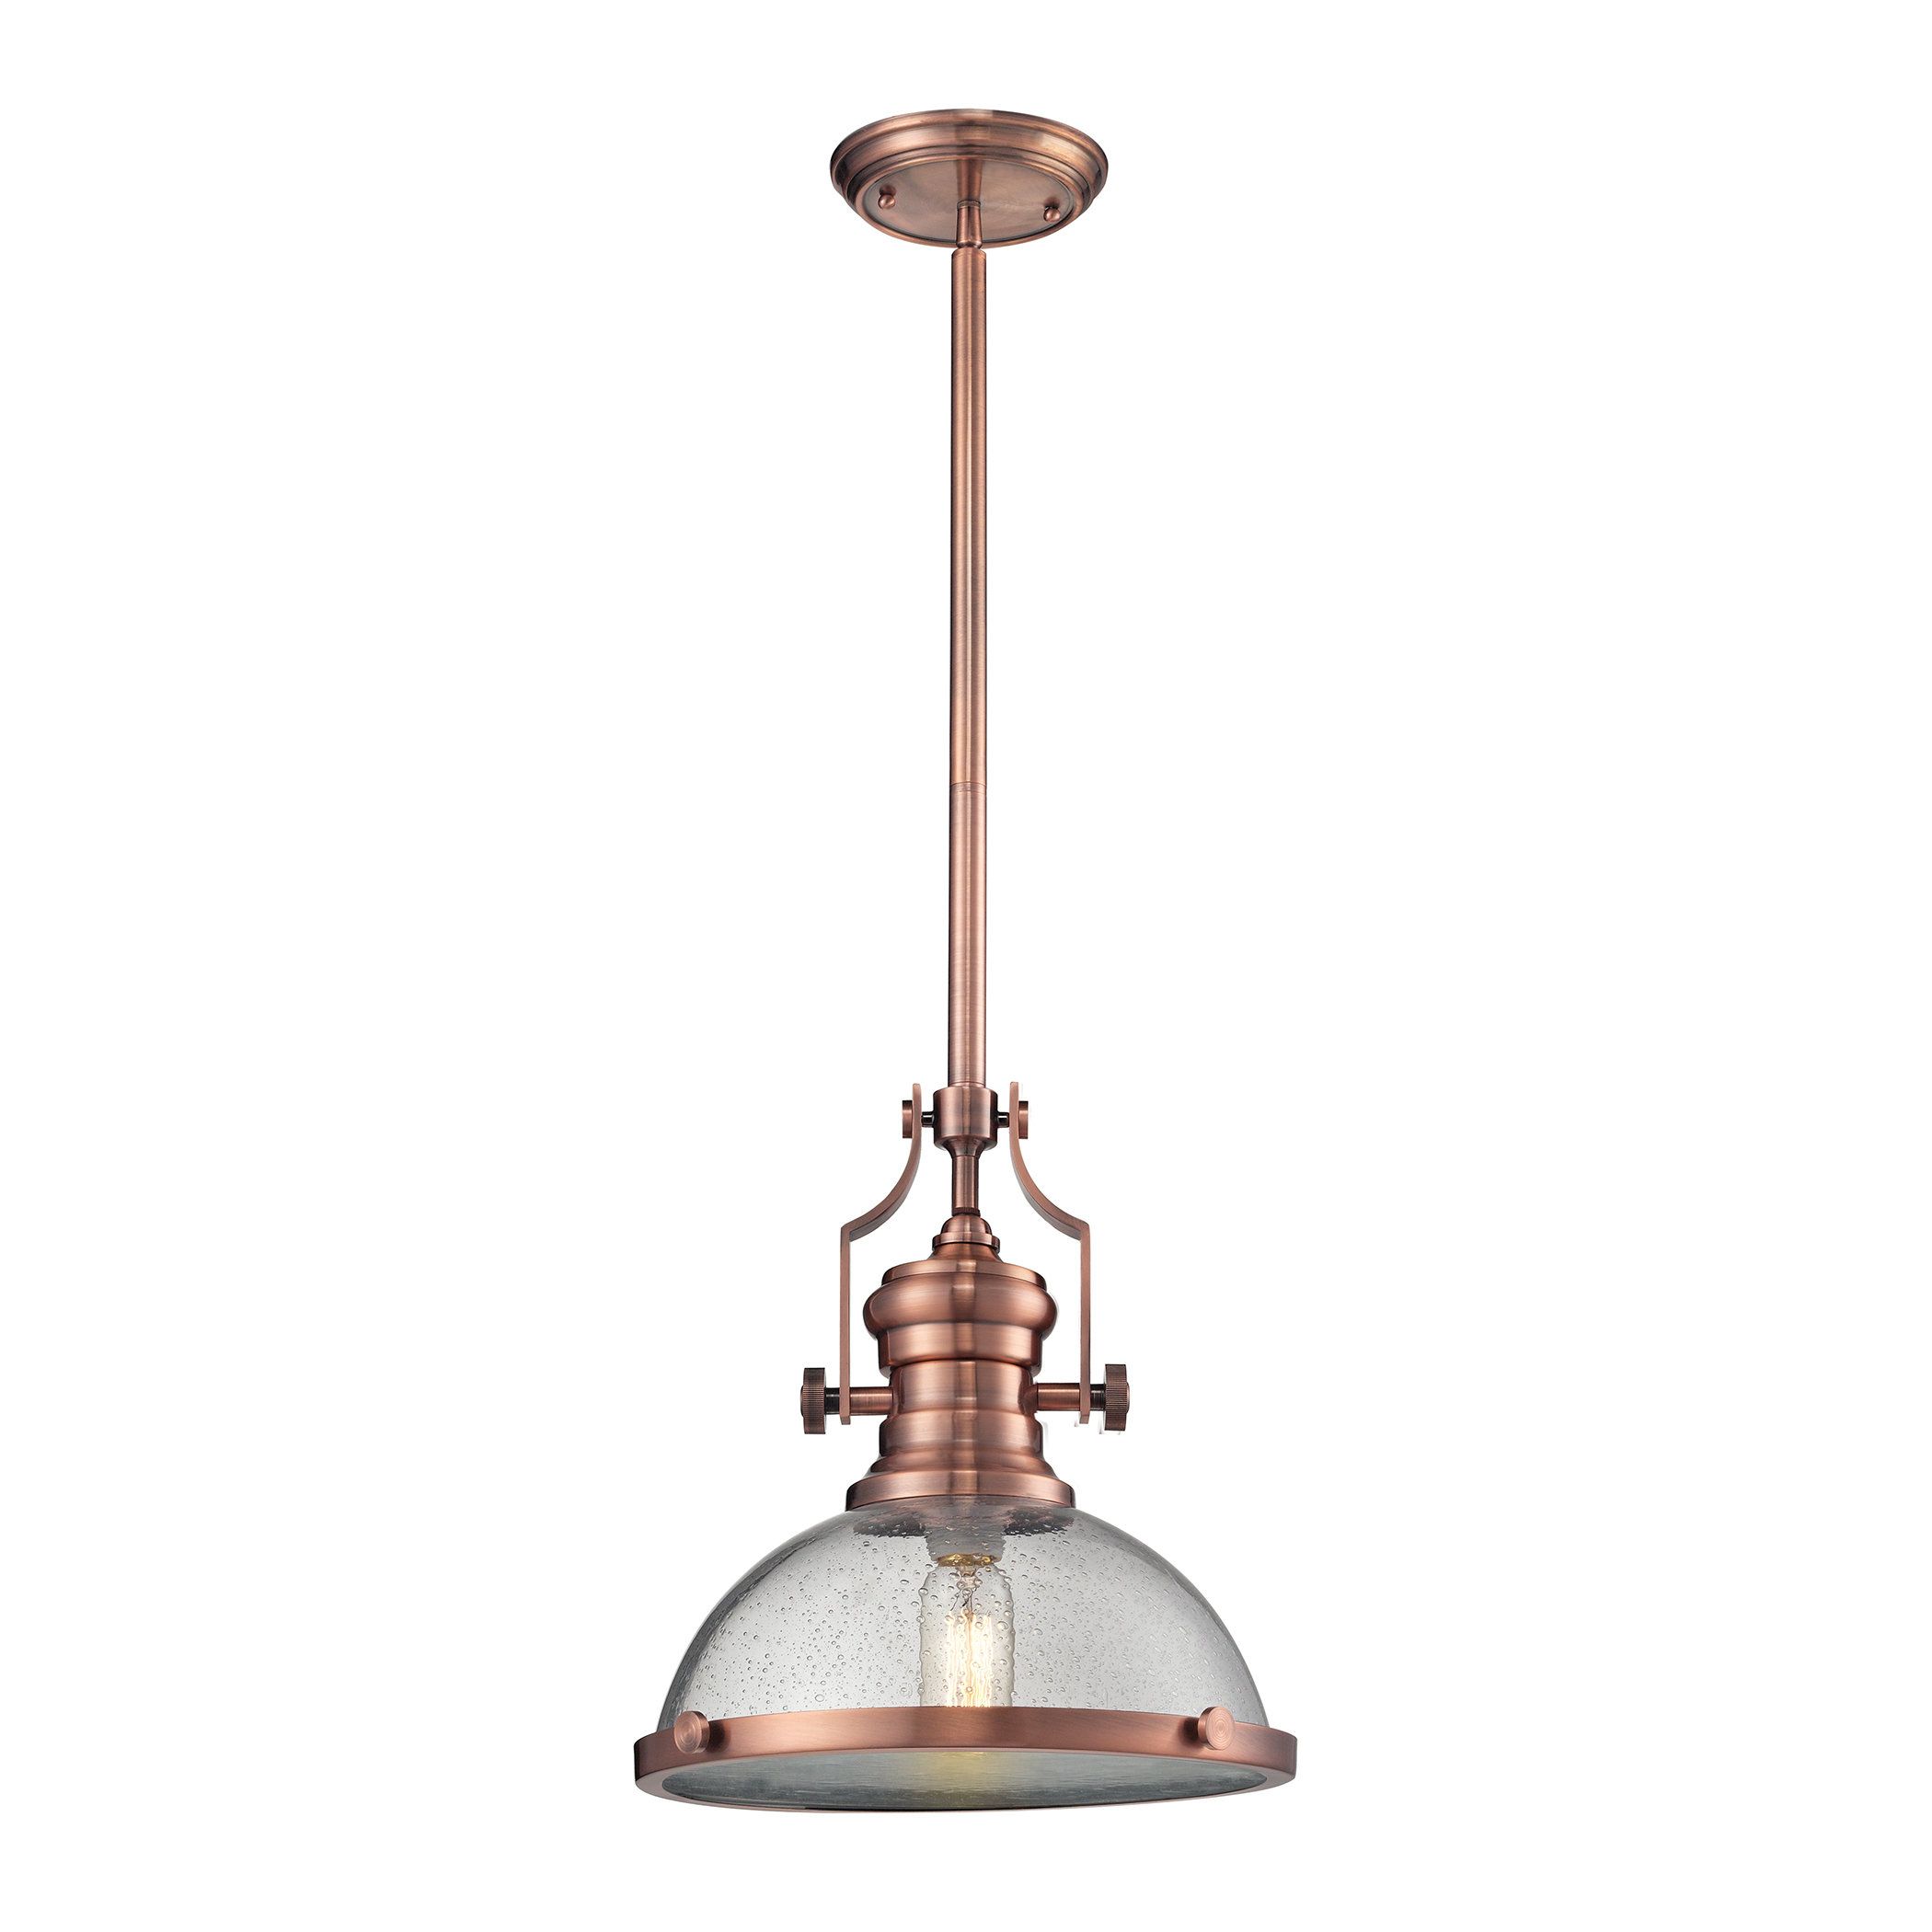 Priston 1 Light Single Dome Pendant Intended For Priston 1 Light Single Dome Pendants (View 3 of 30)